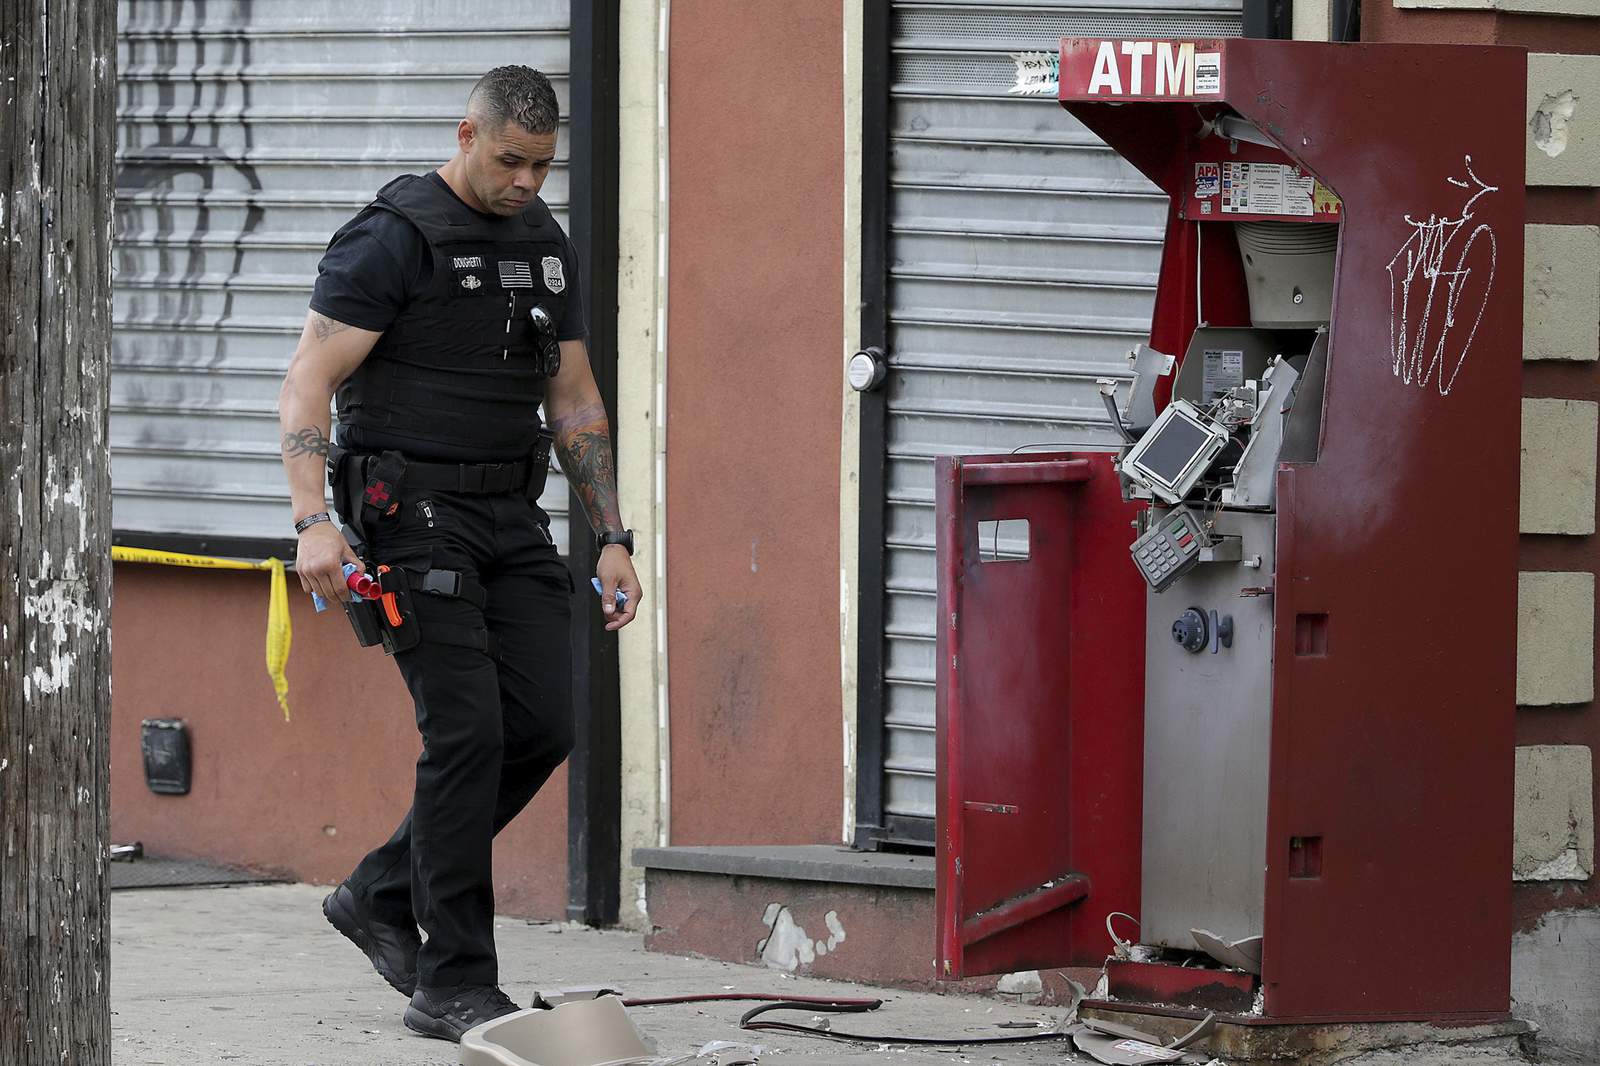 People are blowing up, or just taking, ATMs in Philadelphia